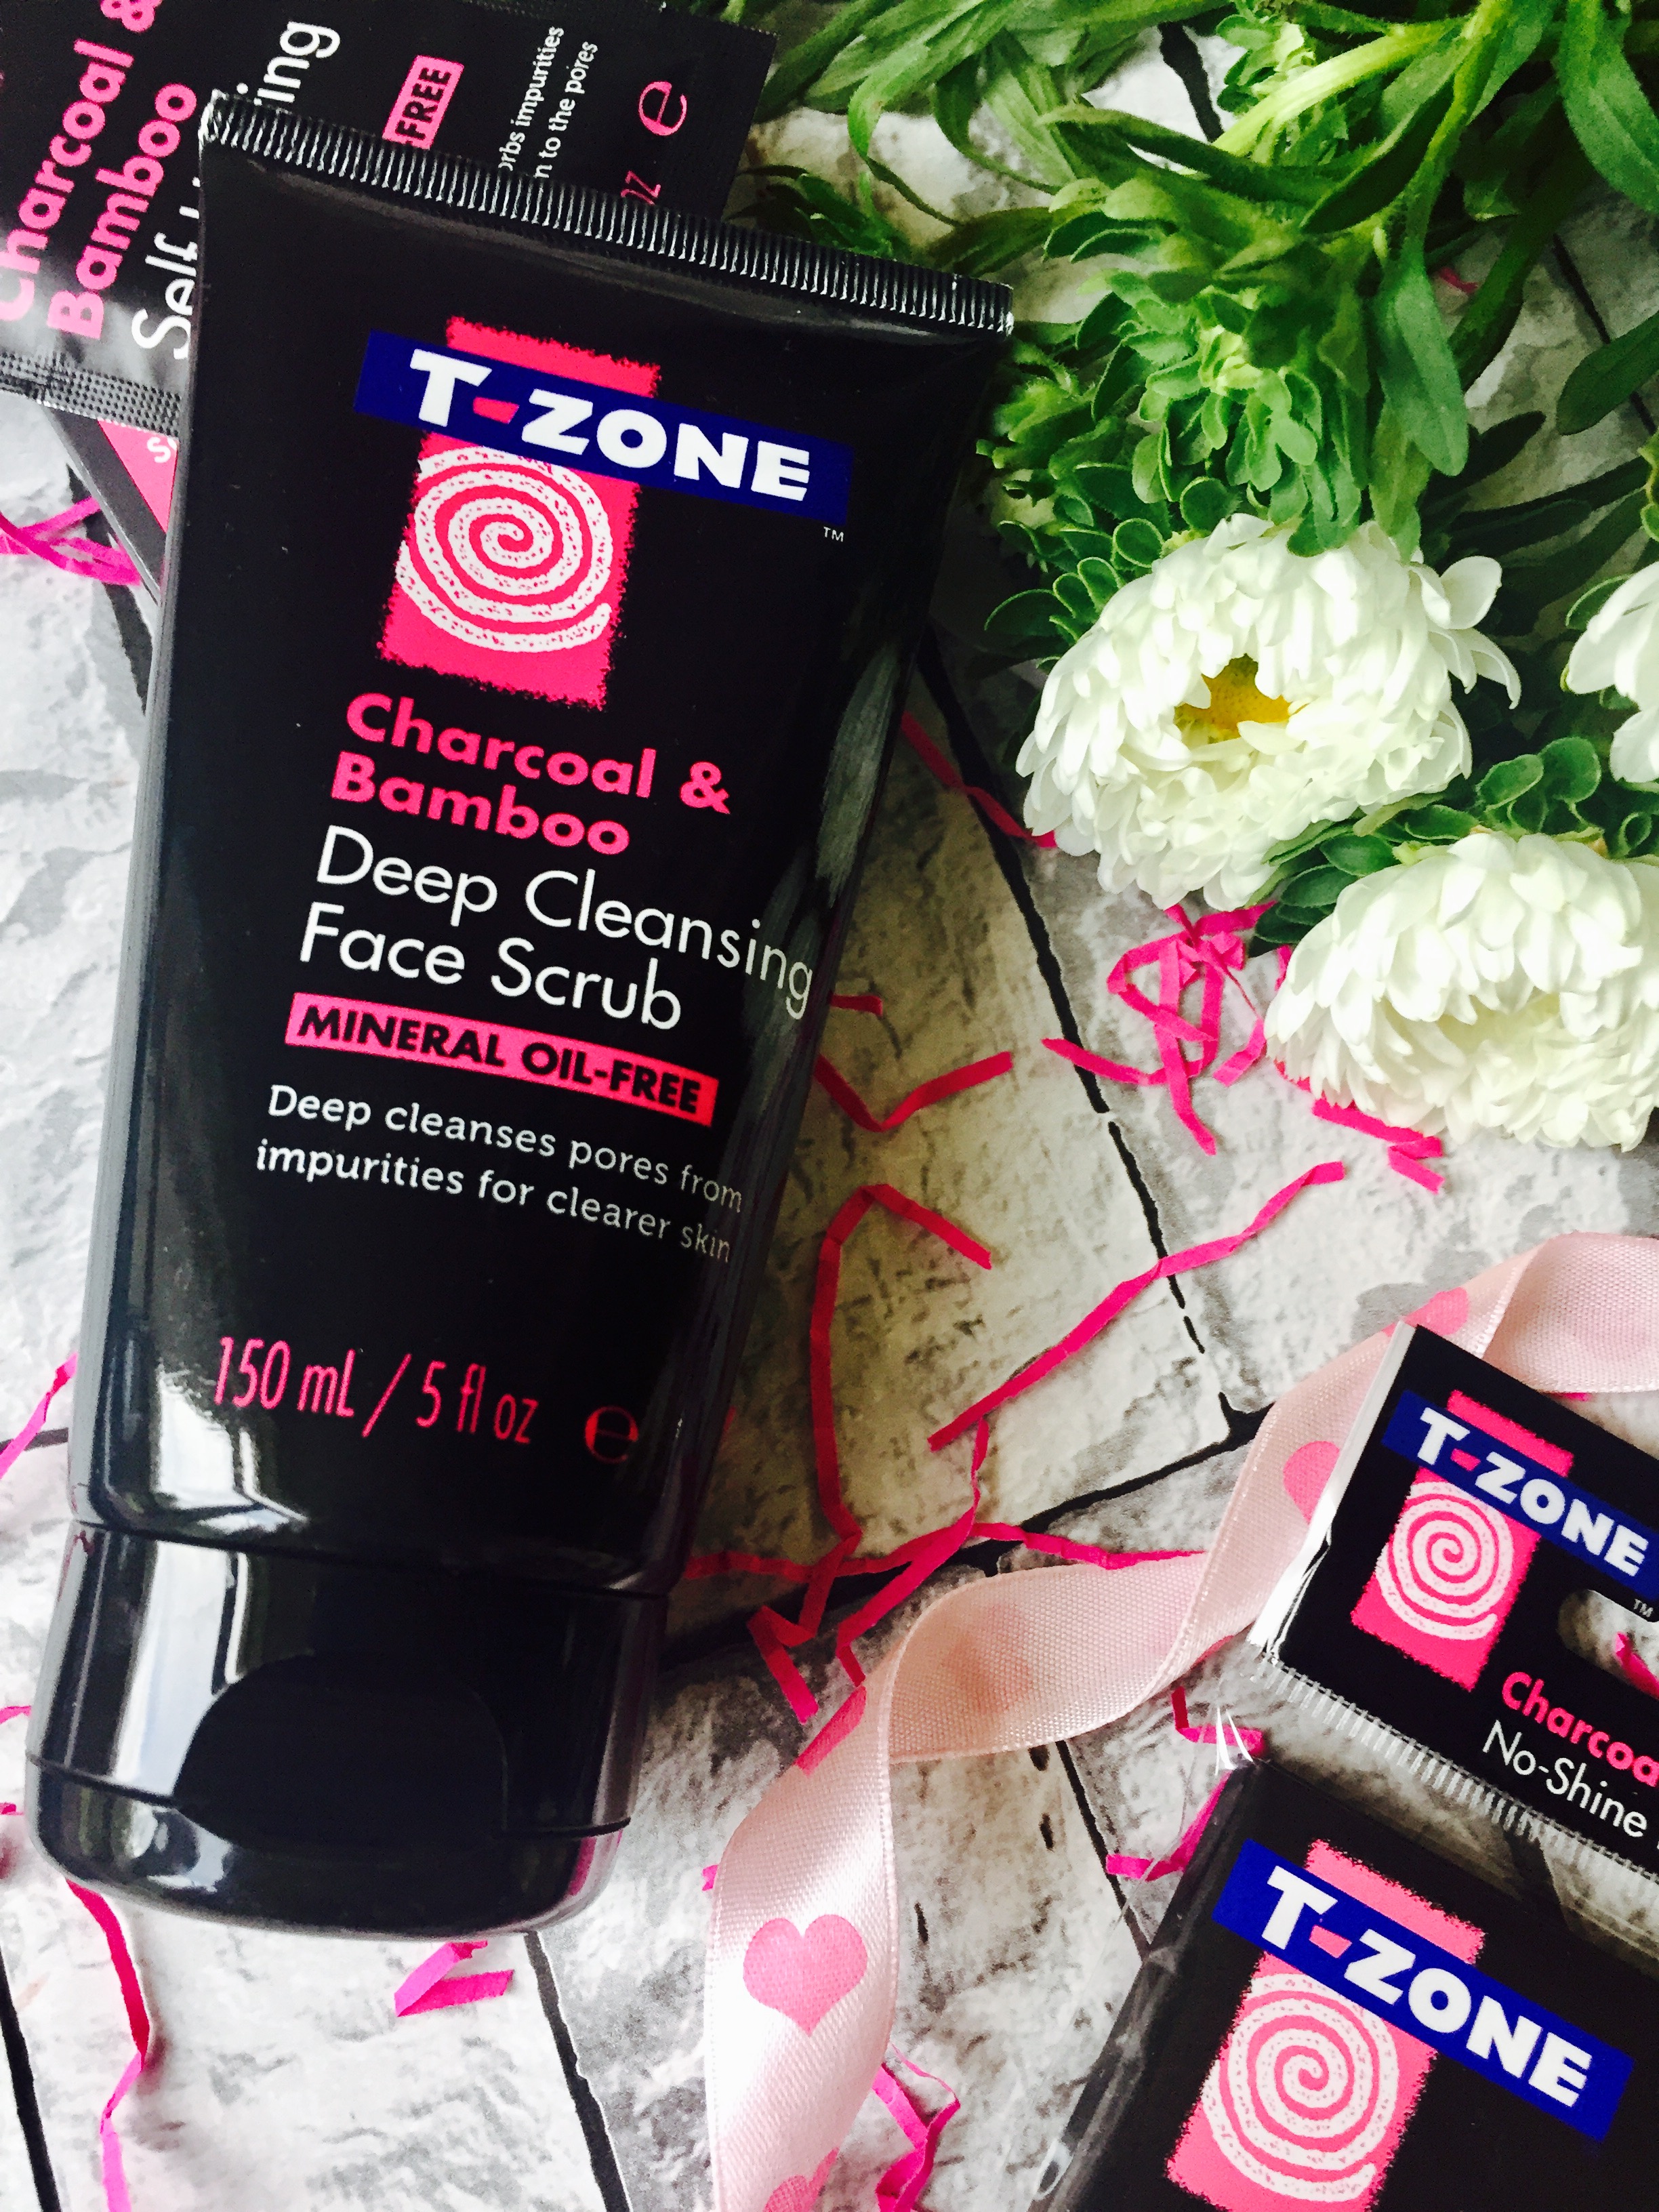 T-Zone affordable skincare for blemish prone skin fight breakouts